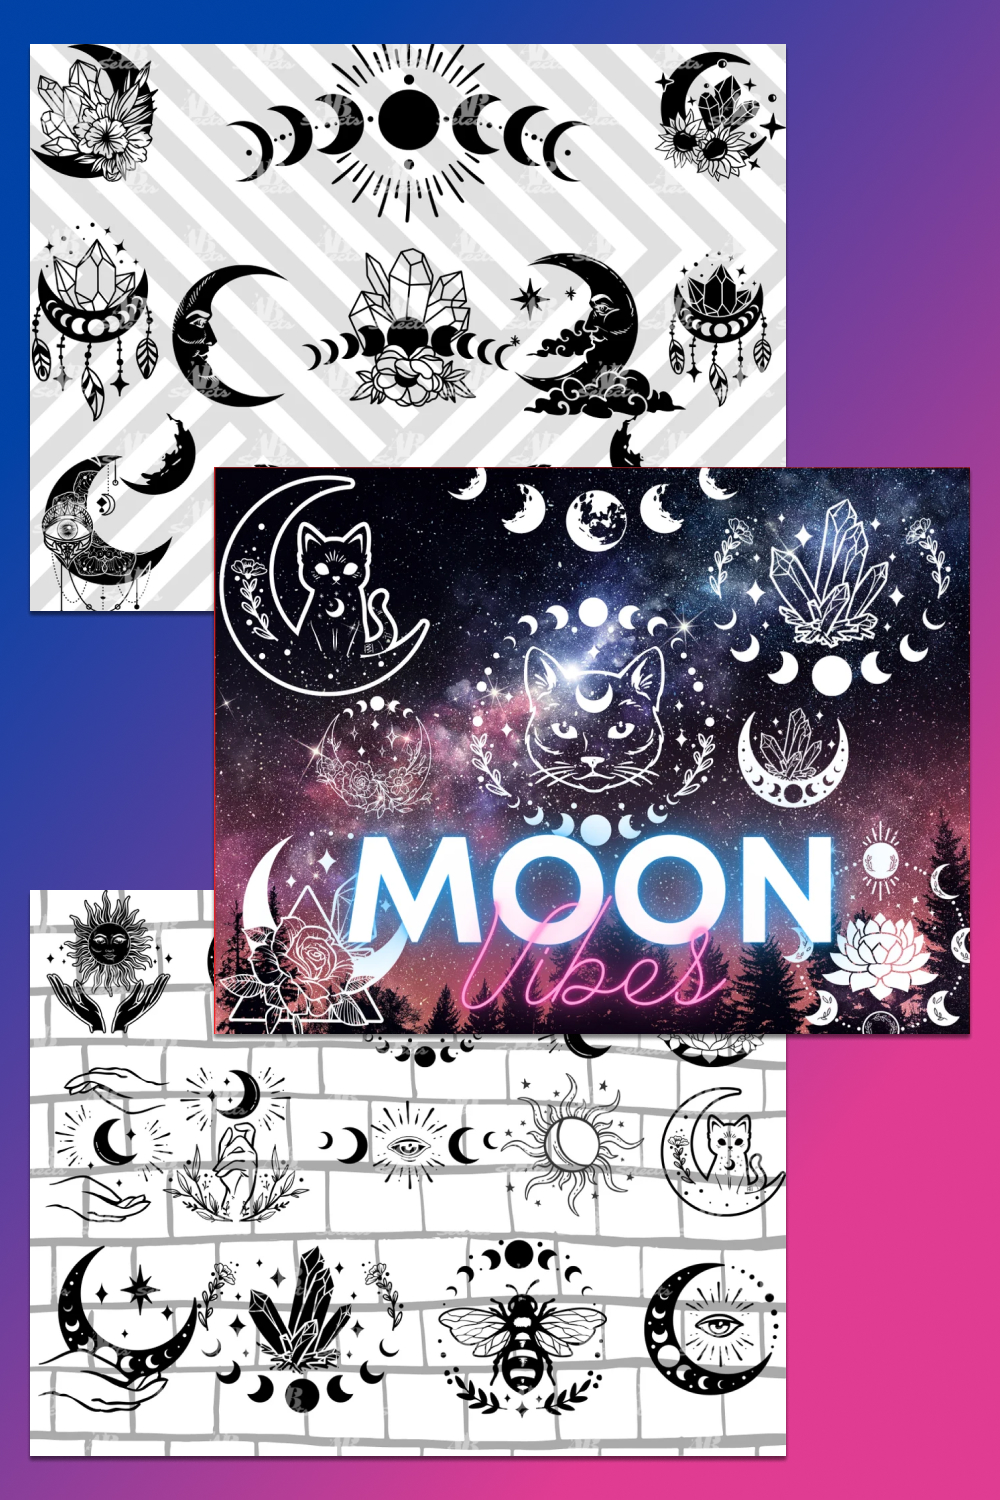 Magical symbols and patterns are depicted on a lunar theme.